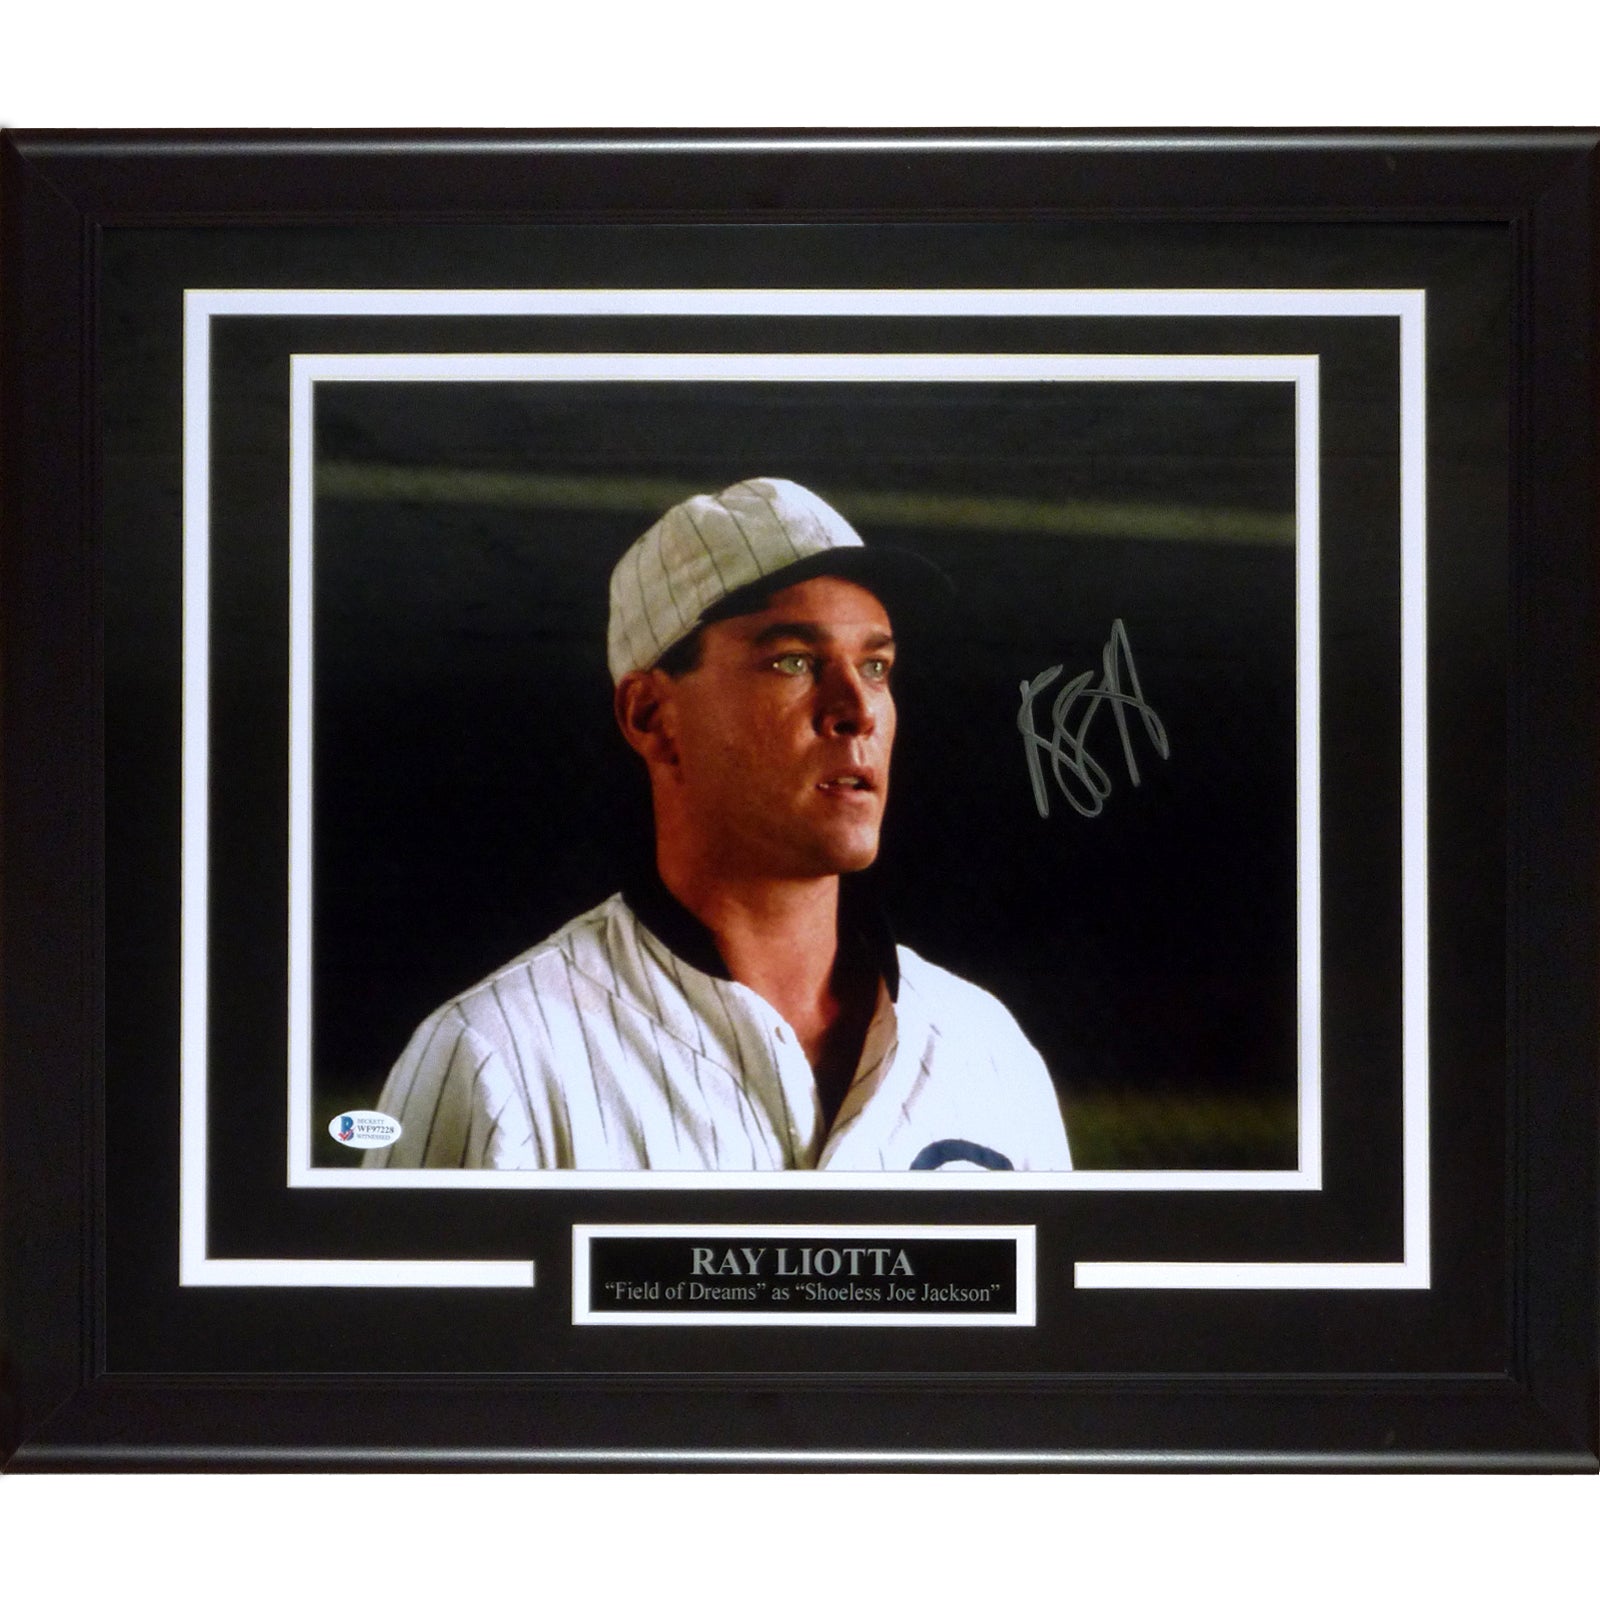 Ray Liotta Autographed Field of Dreams Deluxe Framed 11x14 Photo - Bec –  Palm Beach Autographs LLC